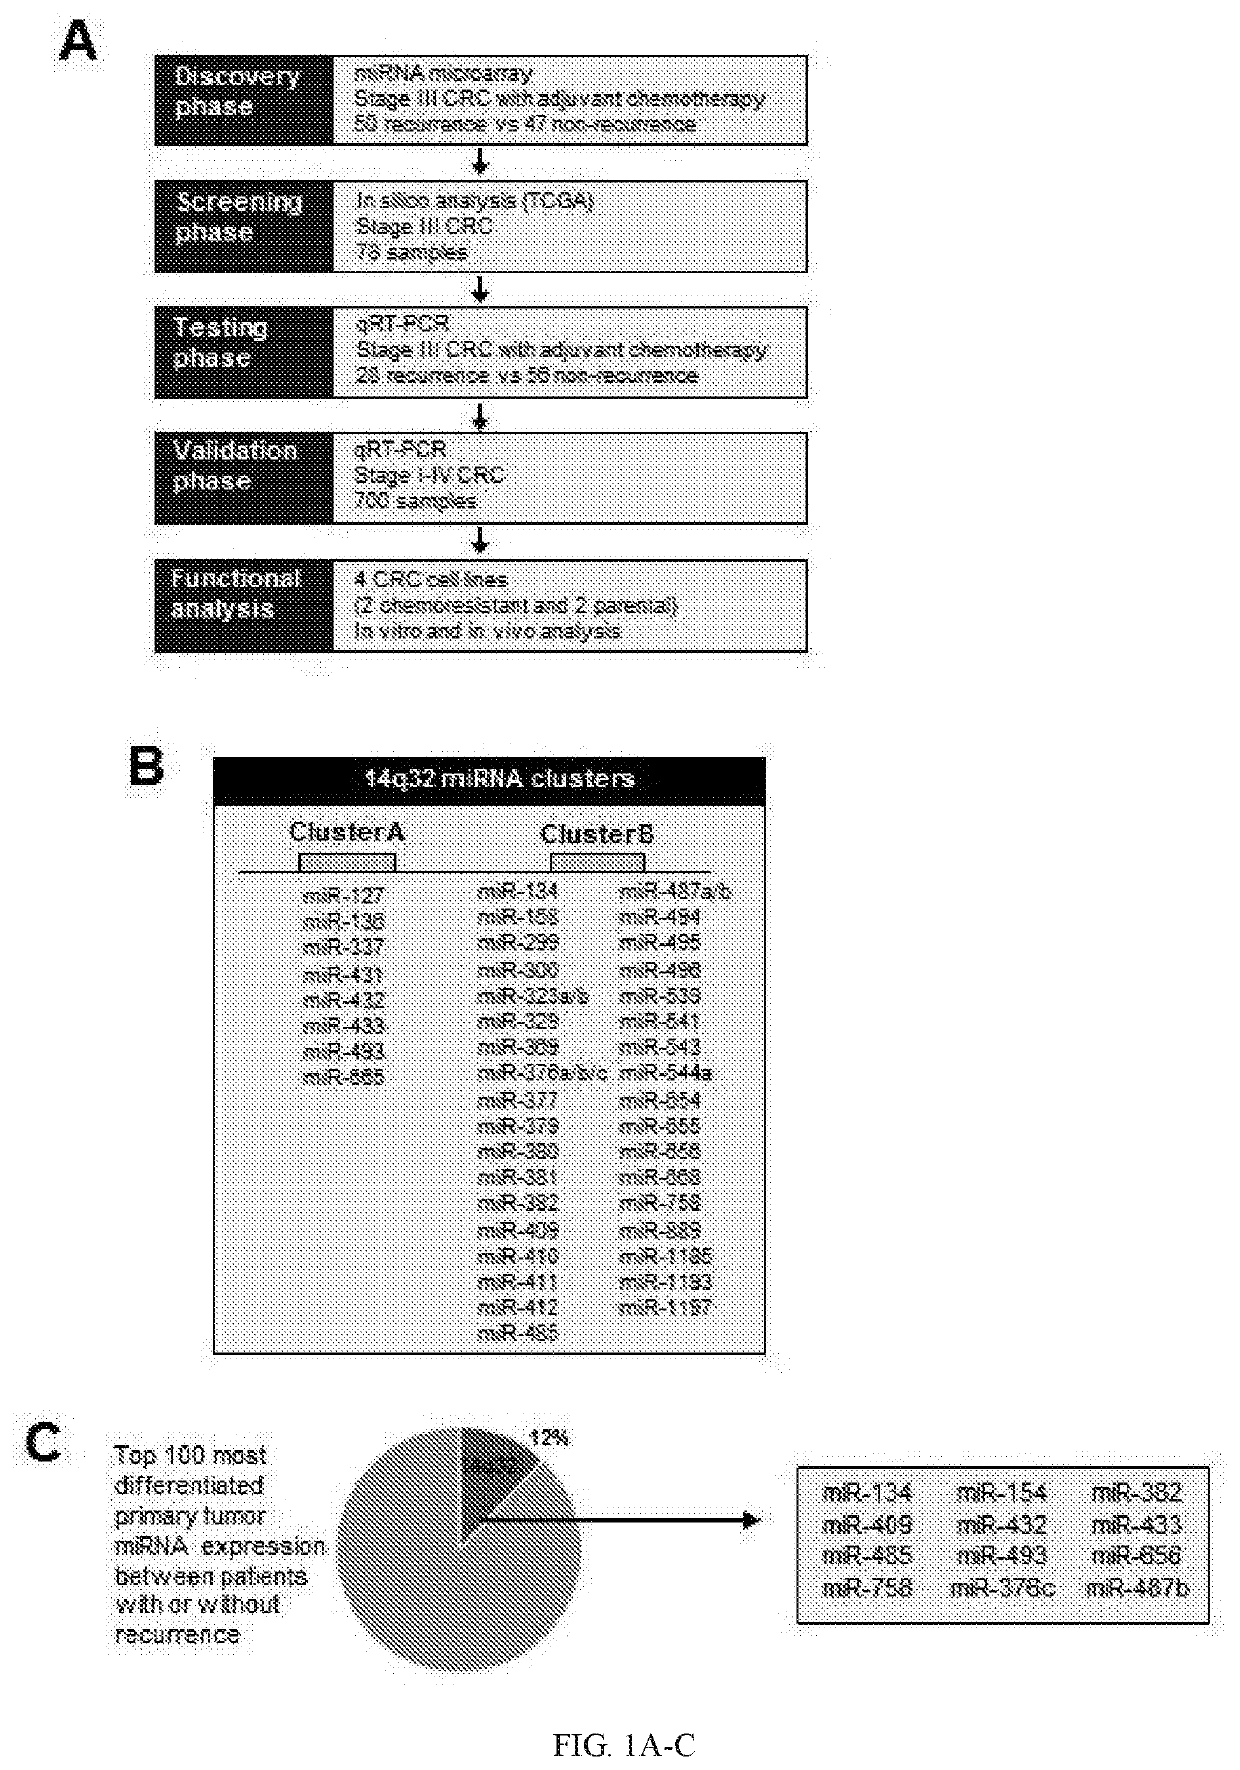 Methods for diagnosing, prognosing, and treating colorectal cancer using biomarker expression